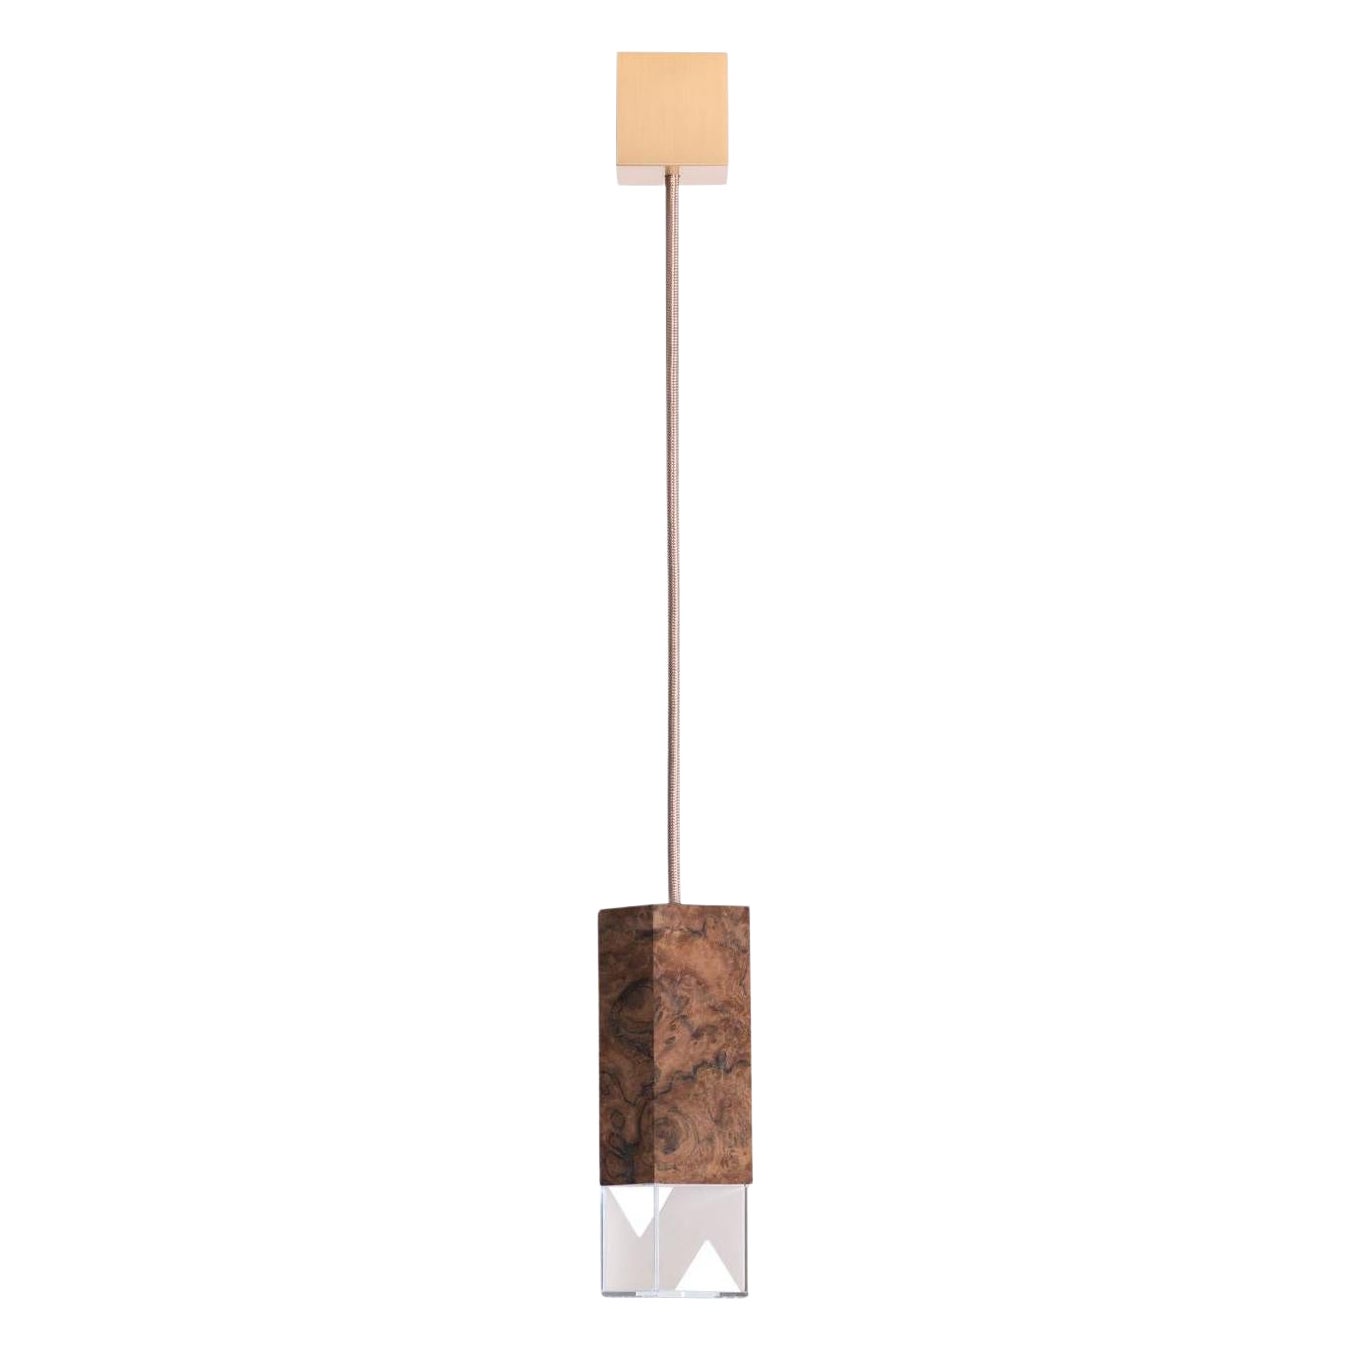 Lamp One Wood 02 by Formaminima For Sale